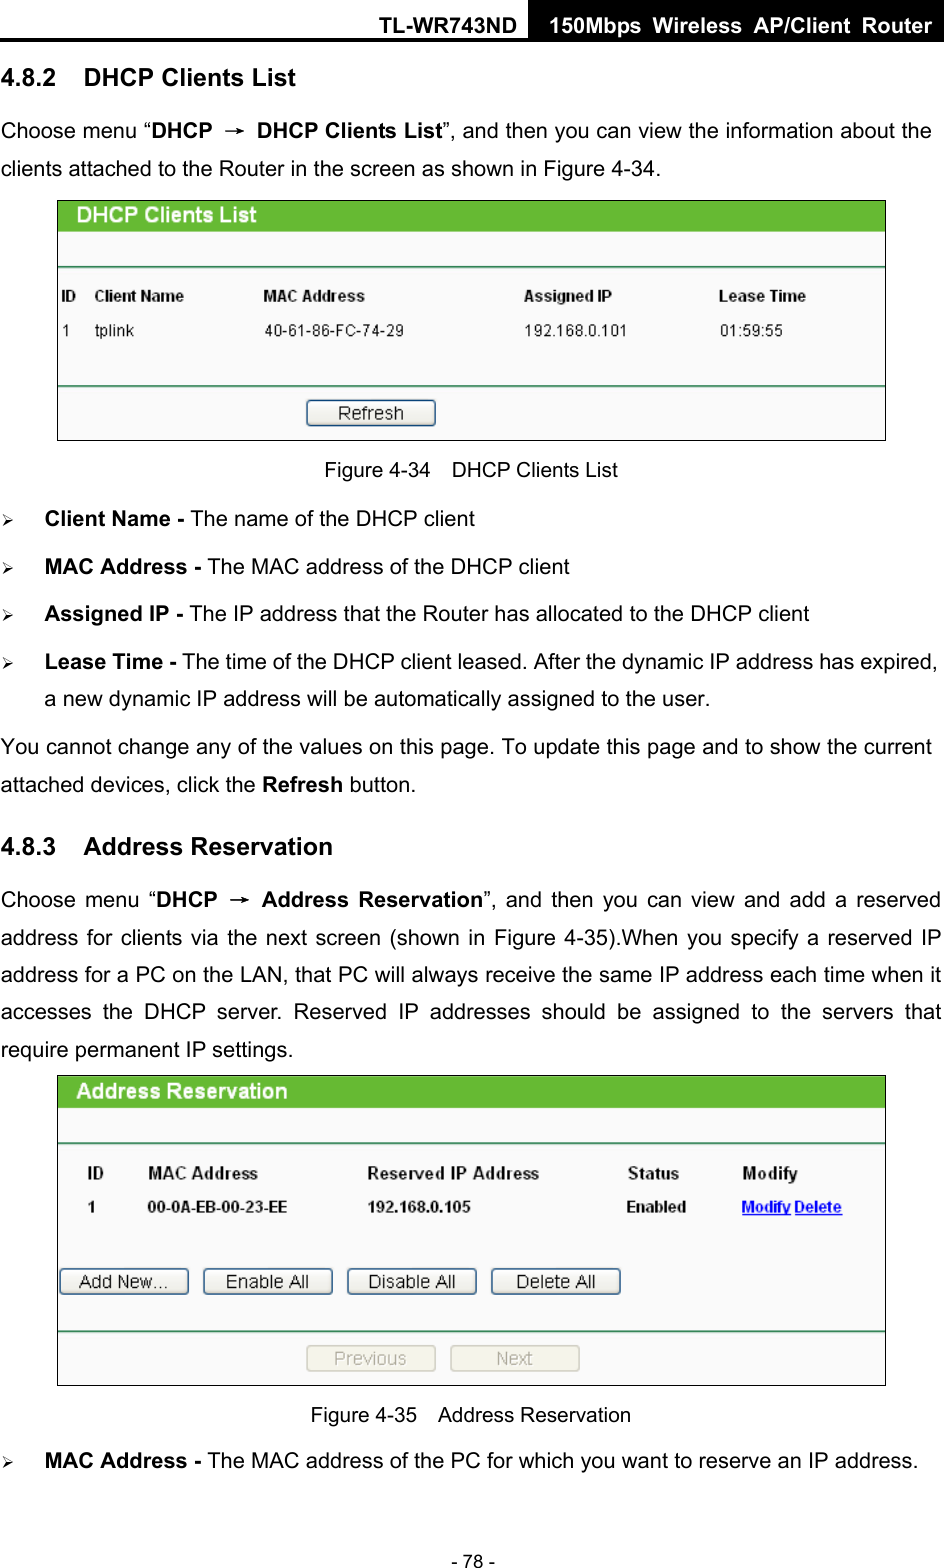 TL-WR743ND 150Mbps Wireless AP/Client Router - 78 - 4.8.2  DHCP Clients List Choose menu “DHCP  →  DHCP Clients List”, and then you can view the information about the clients attached to the Router in the screen as shown in Figure 4-34.  Figure 4-34    DHCP Clients List  Client Name - The name of the DHCP client    MAC Address - The MAC address of the DHCP client    Assigned IP - The IP address that the Router has allocated to the DHCP client  Lease Time - The time of the DHCP client leased. After the dynamic IP address has expired, a new dynamic IP address will be automatically assigned to the user.     You cannot change any of the values on this page. To update this page and to show the current attached devices, click the Refresh button. 4.8.3  Address Reservation Choose menu “DHCP  → Address Reservation”, and then you can view and add a reserved address for clients via the next screen (shown in Figure 4-35).When you specify a reserved IP address for a PC on the LAN, that PC will always receive the same IP address each time when it accesses the DHCP server. Reserved IP addresses should be assigned to the servers that require permanent IP settings.    Figure 4-35  Address Reservation  MAC Address - The MAC address of the PC for which you want to reserve an IP address. 